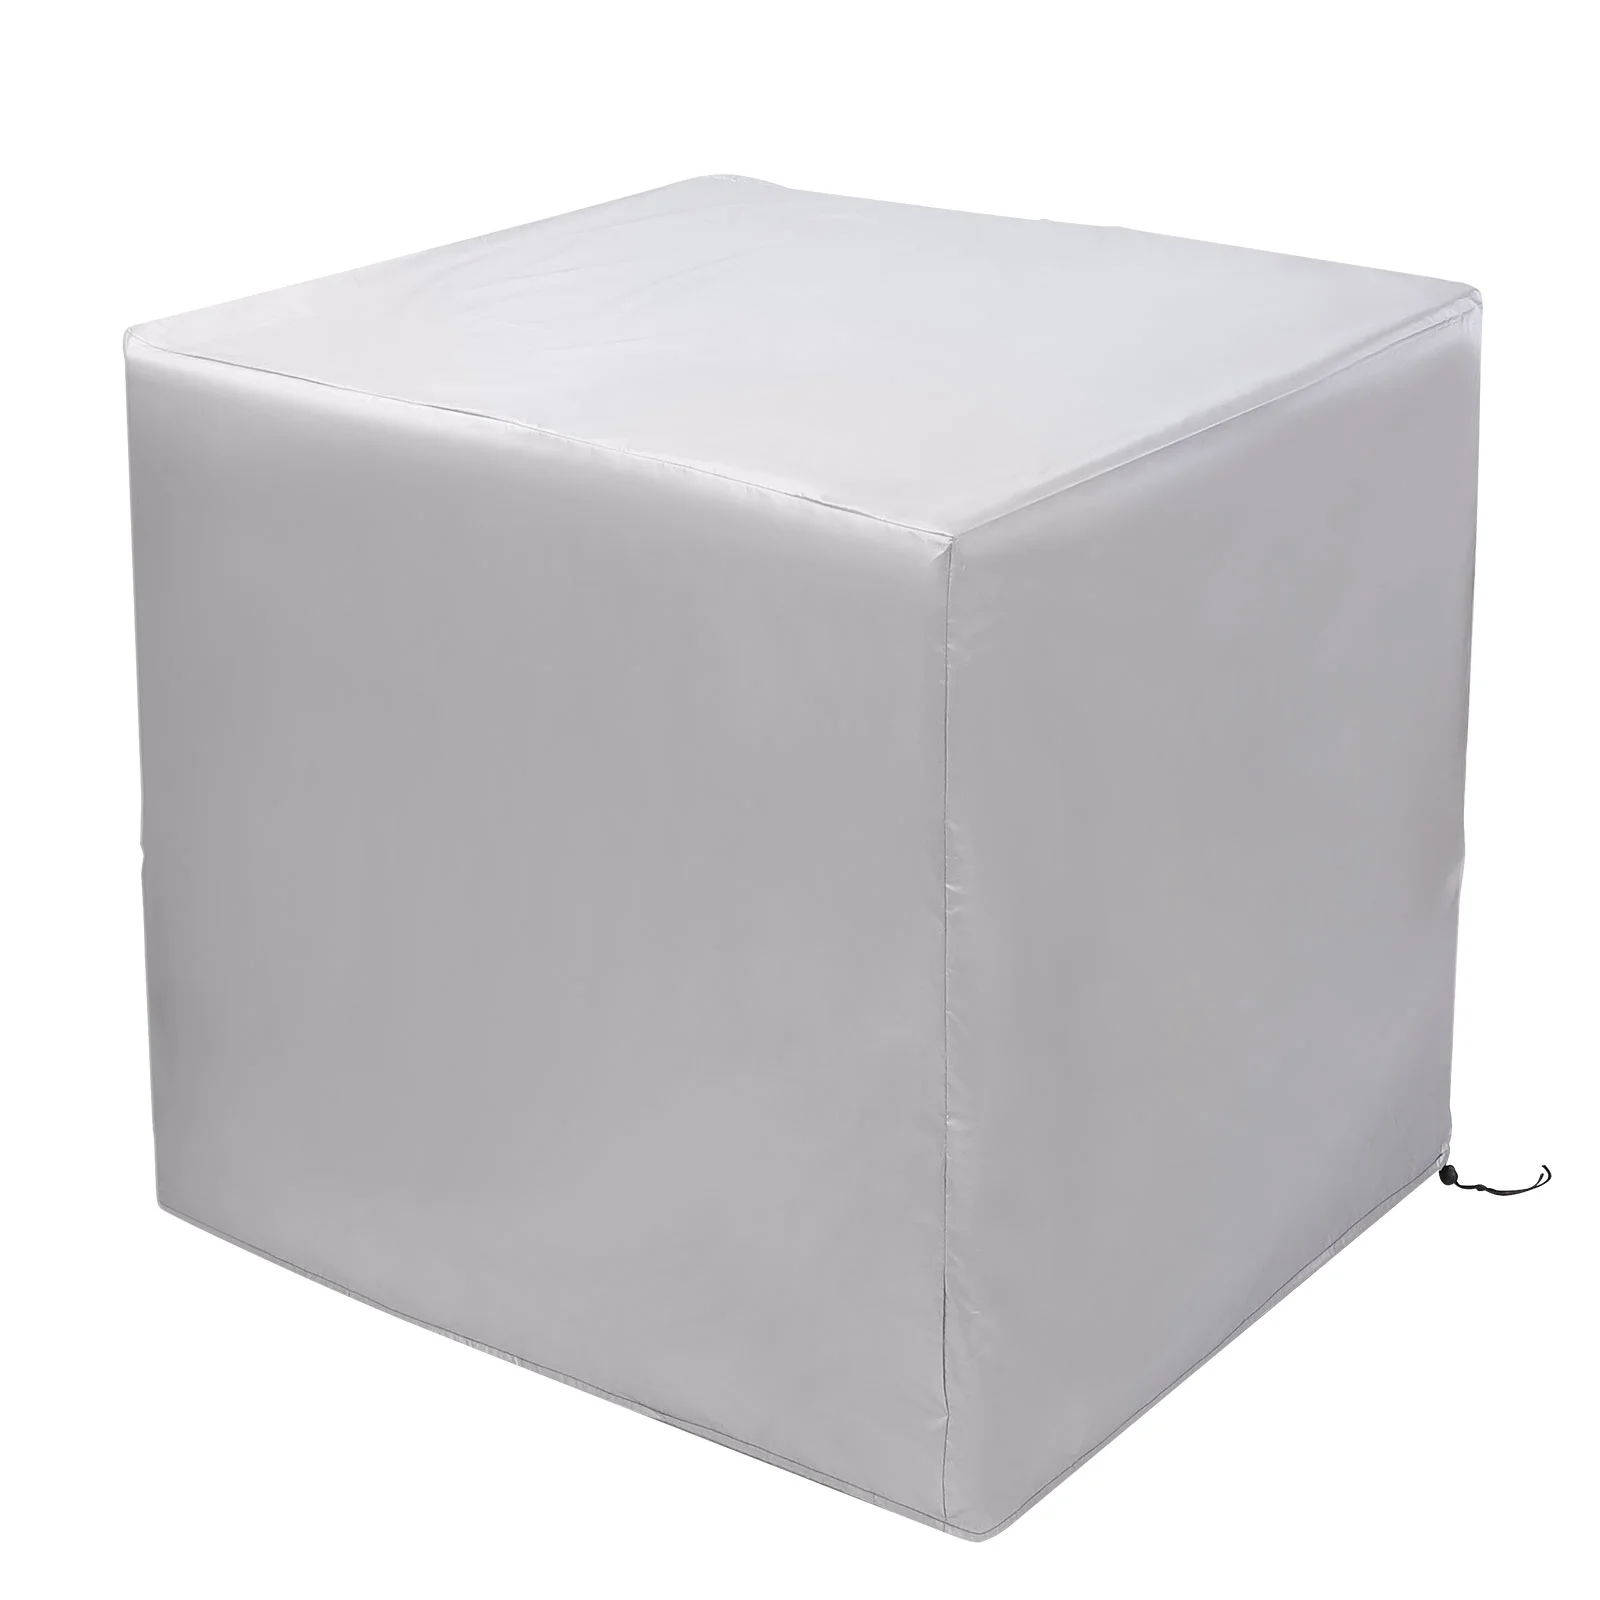 

Waterproof Couch Cover Outdoor Covers Garden Dust Patio Furniture Combination Protector Swings